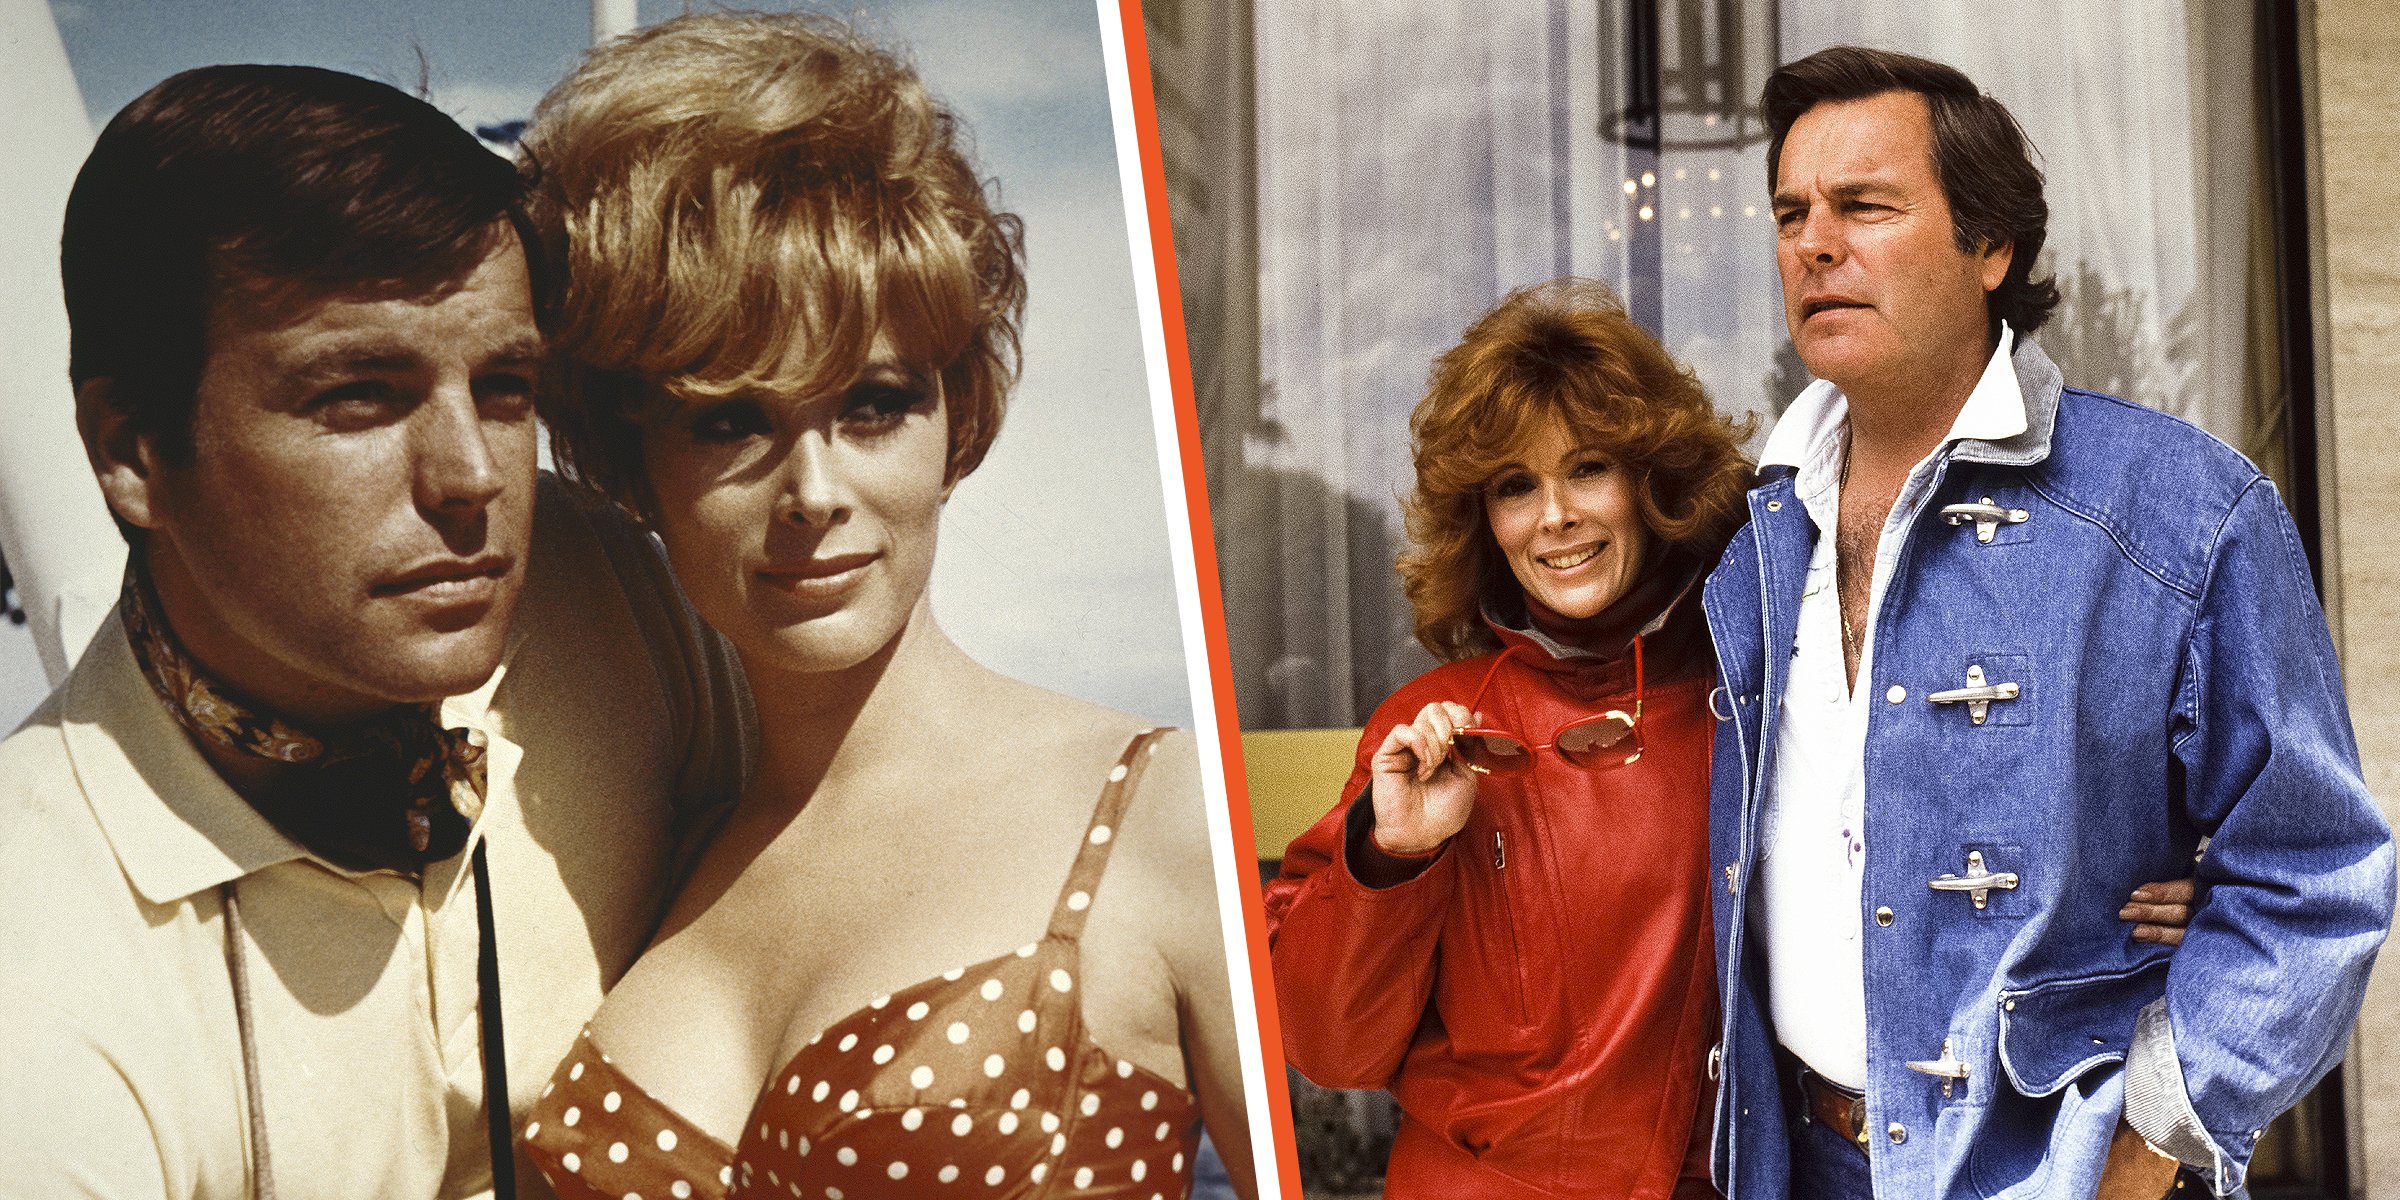 Robert Wagner and Jill St. John | Source: Getty Images